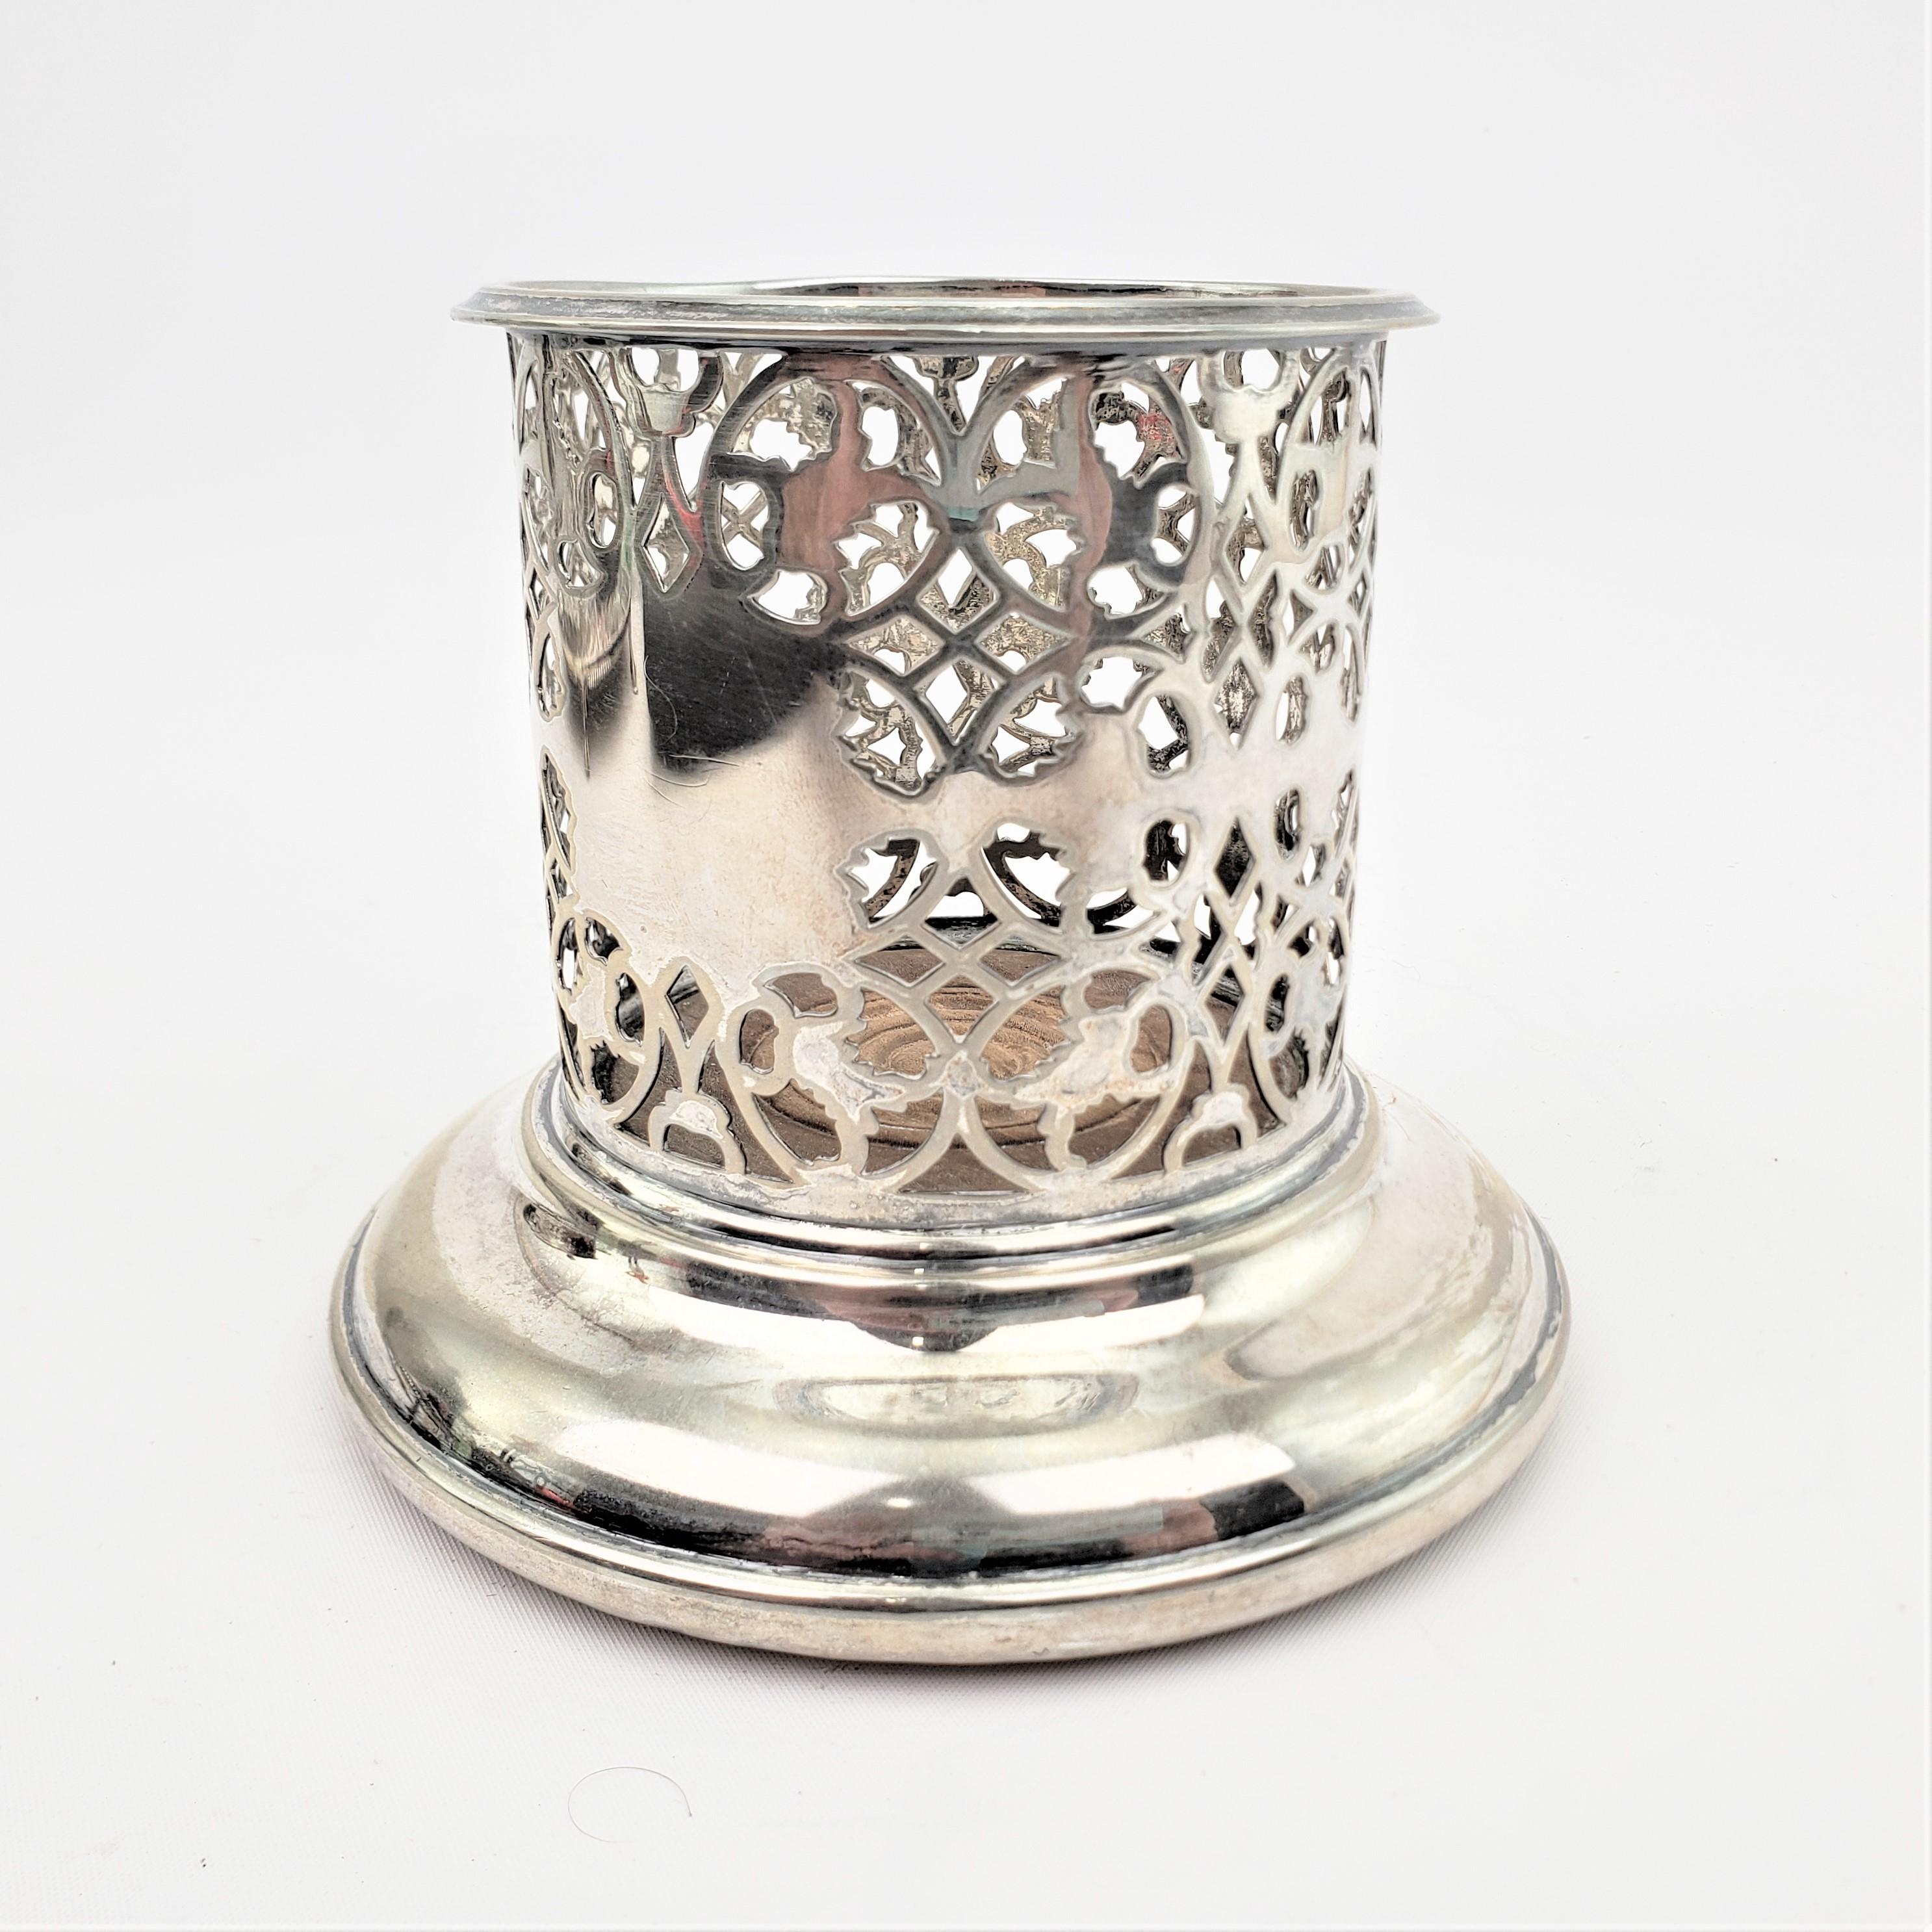 English Antique Silver Plated Pierced Wine Bottle Coaster with Turned Wooden Base